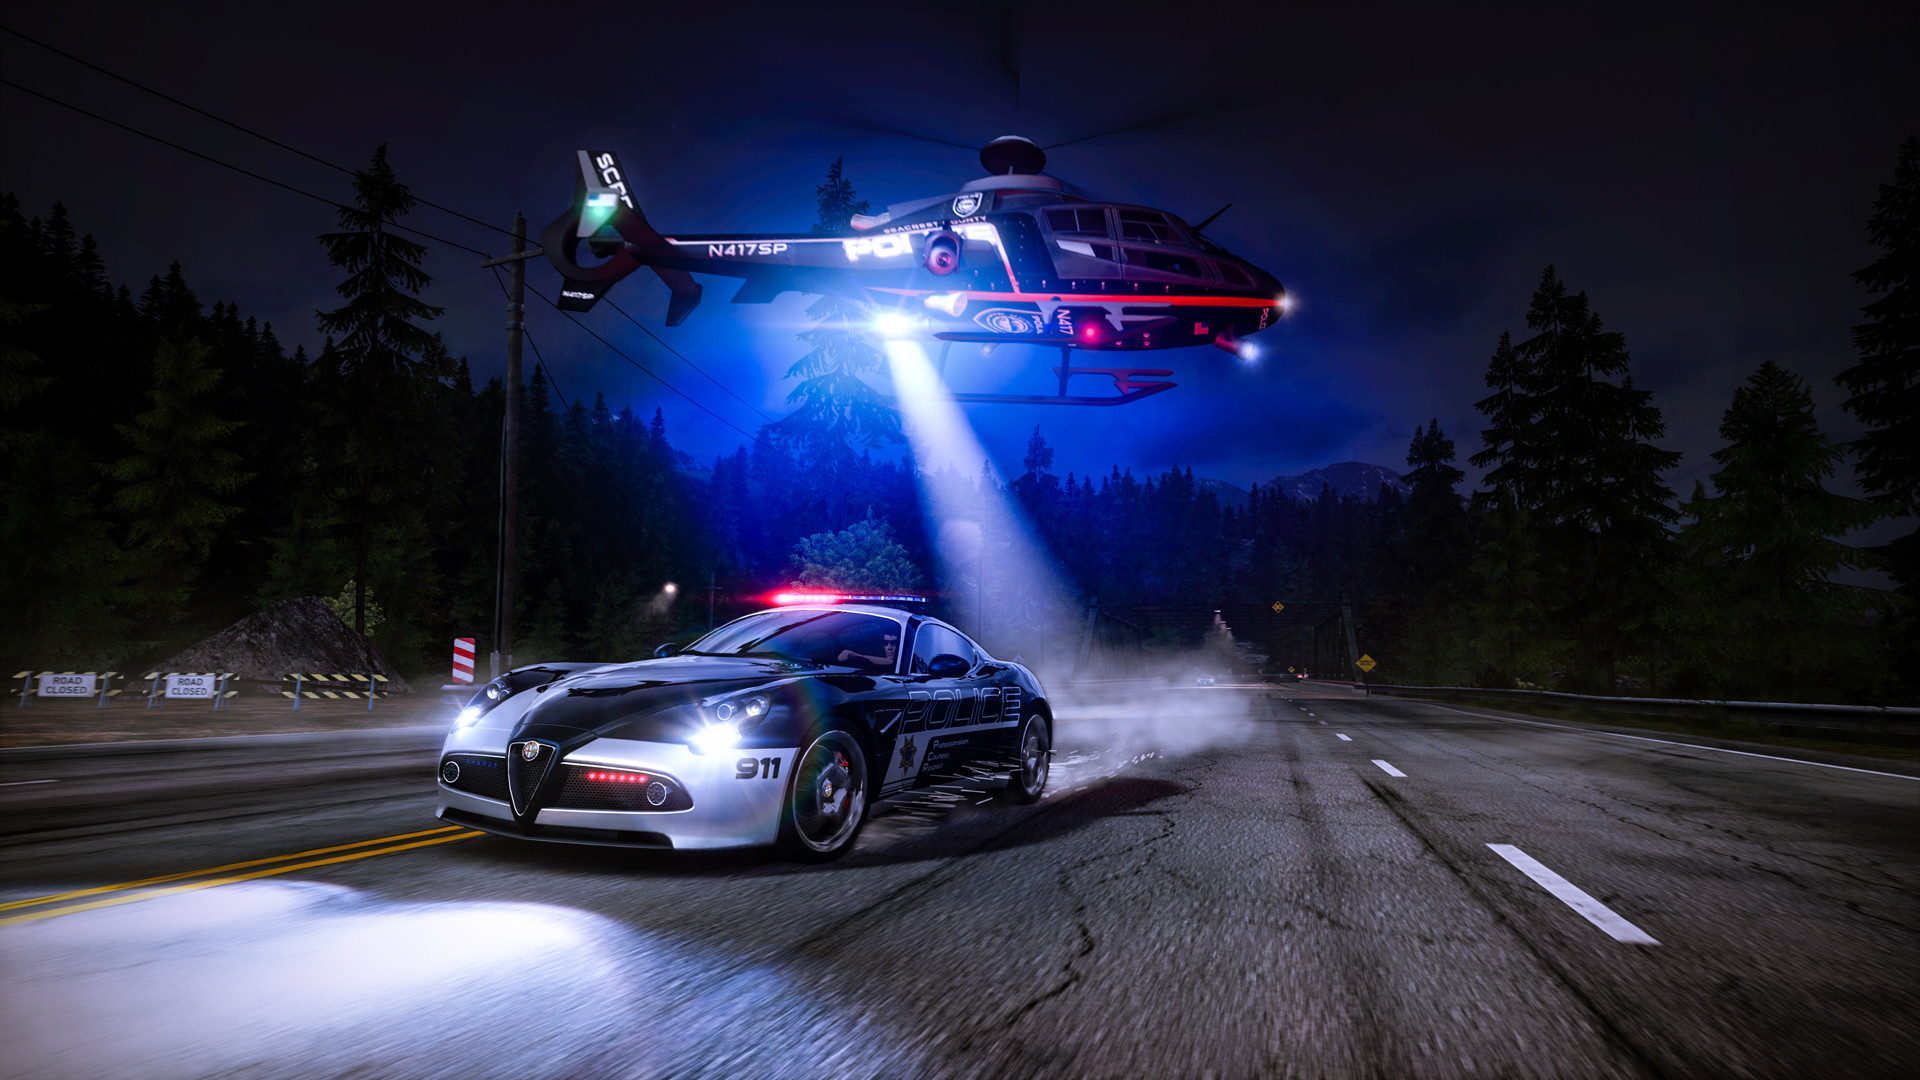 need for speed hot pursuit remastered key